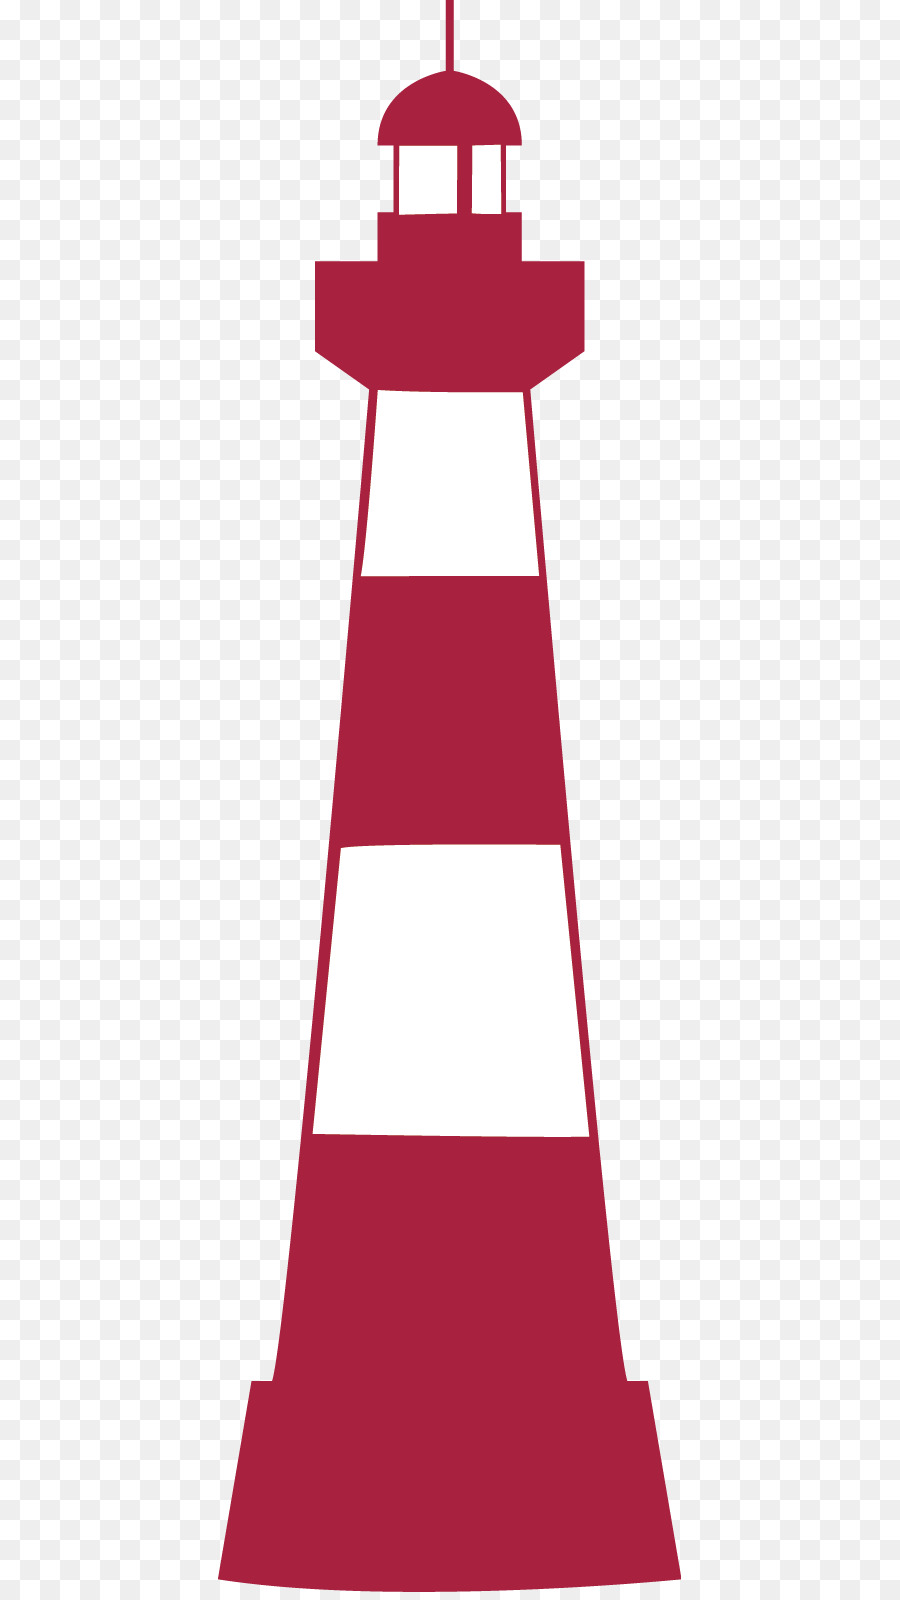 Lighthouse Clip art - Lighthouse silhouette material png download - 463*1592 - Free Transparent Lighthouse png Download.